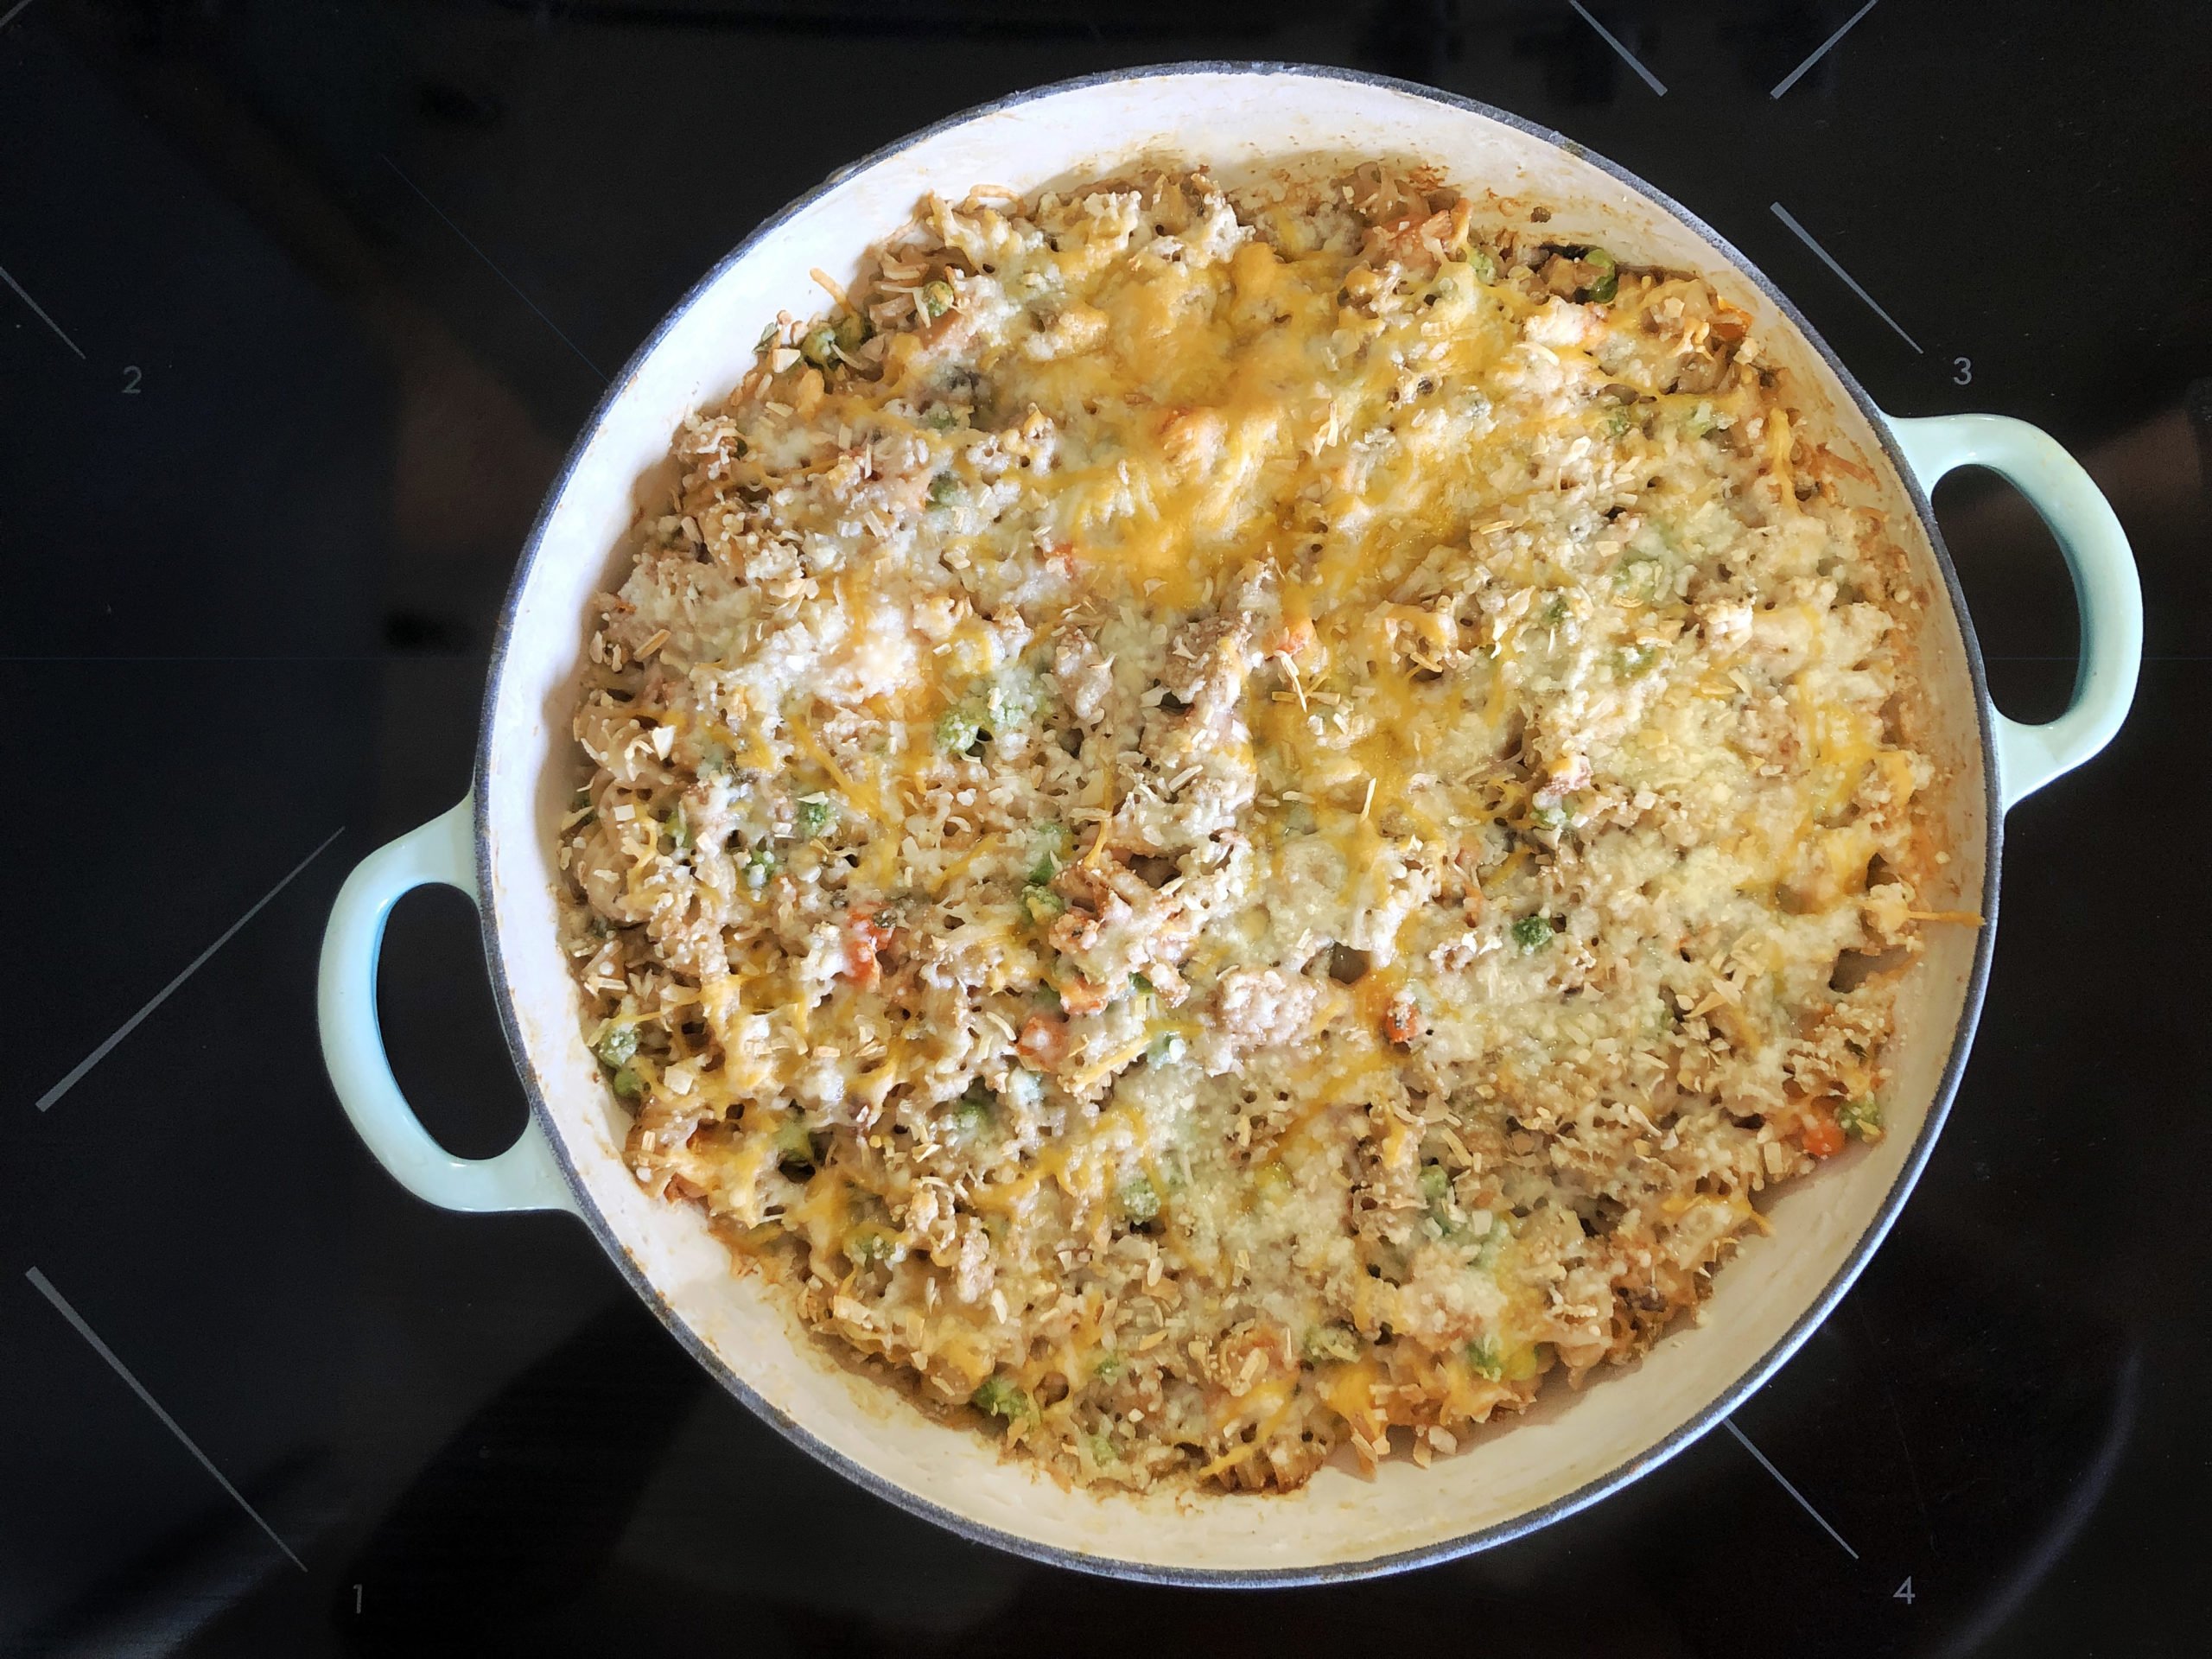 Tuna noodle casserole in Le Creuset dish on stovetop.